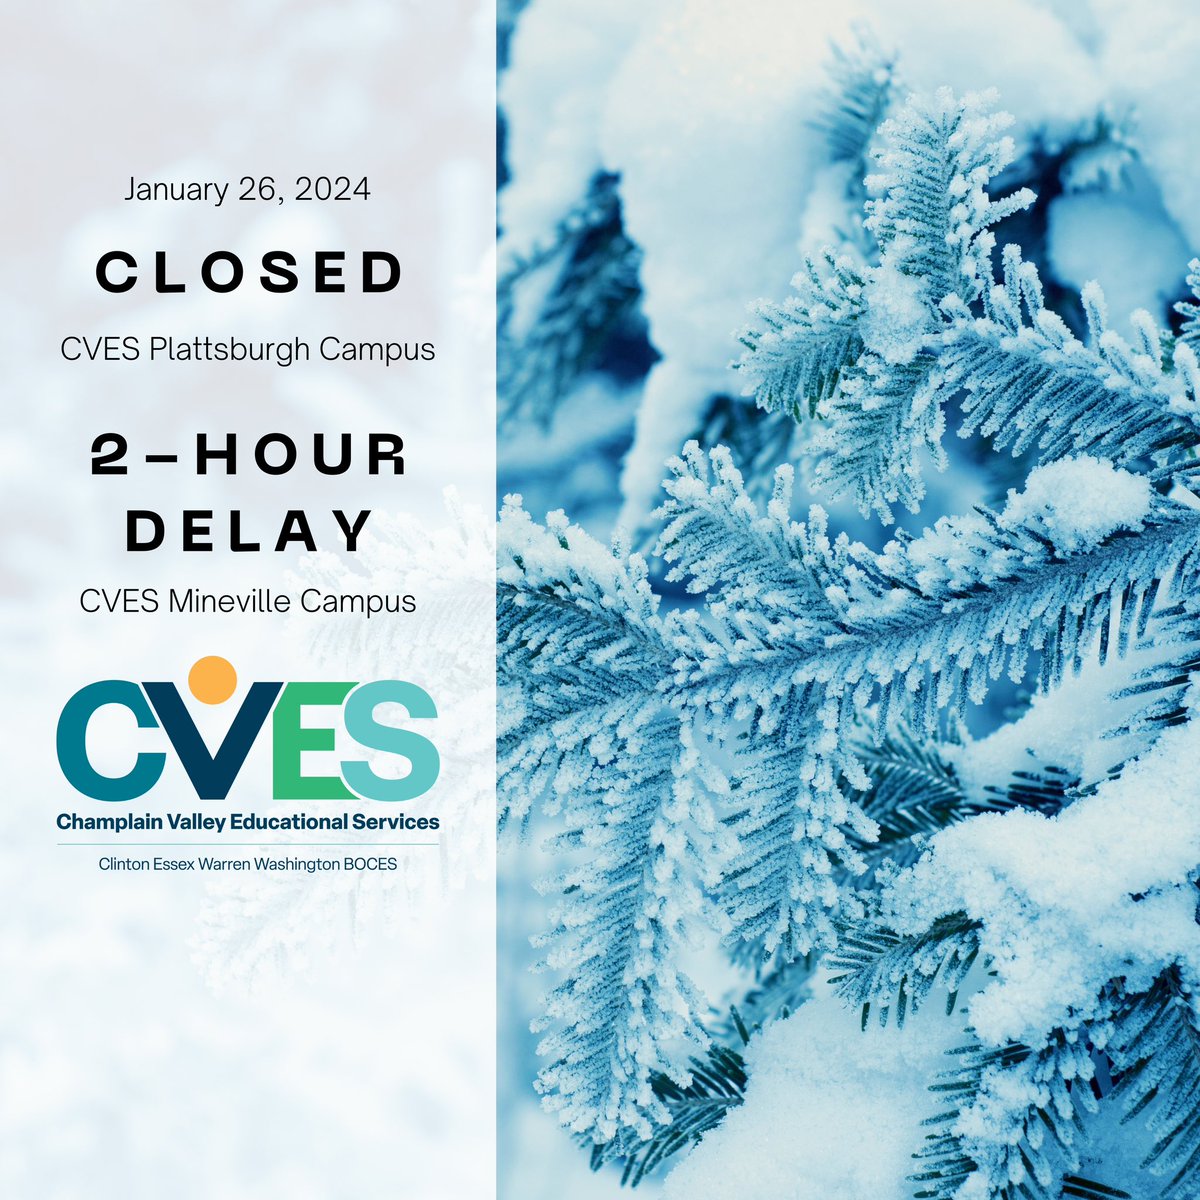 Due to inclement weather, our CVES Plattsburgh Campuses are closed, and our CVES Mineville Campus is in a 2-Hour Delay for today, Friday, January 26.